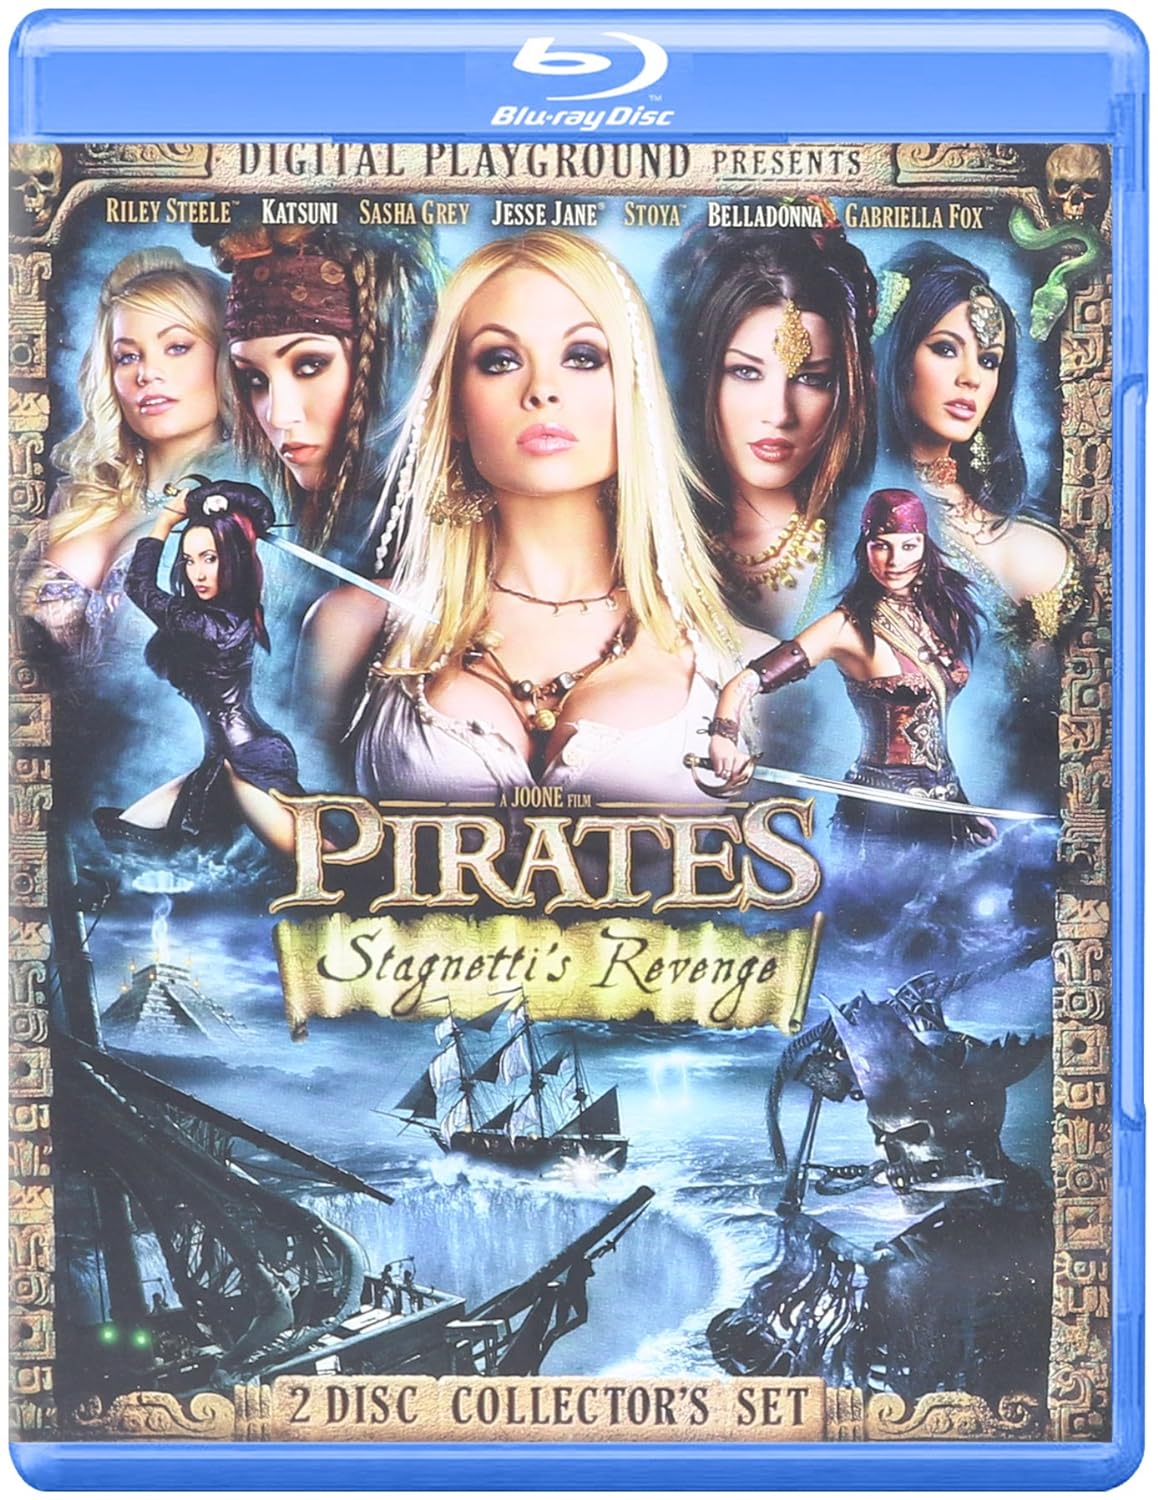 carrie culver recommends Pirates 2 Stagnetti Revenge Full Movie